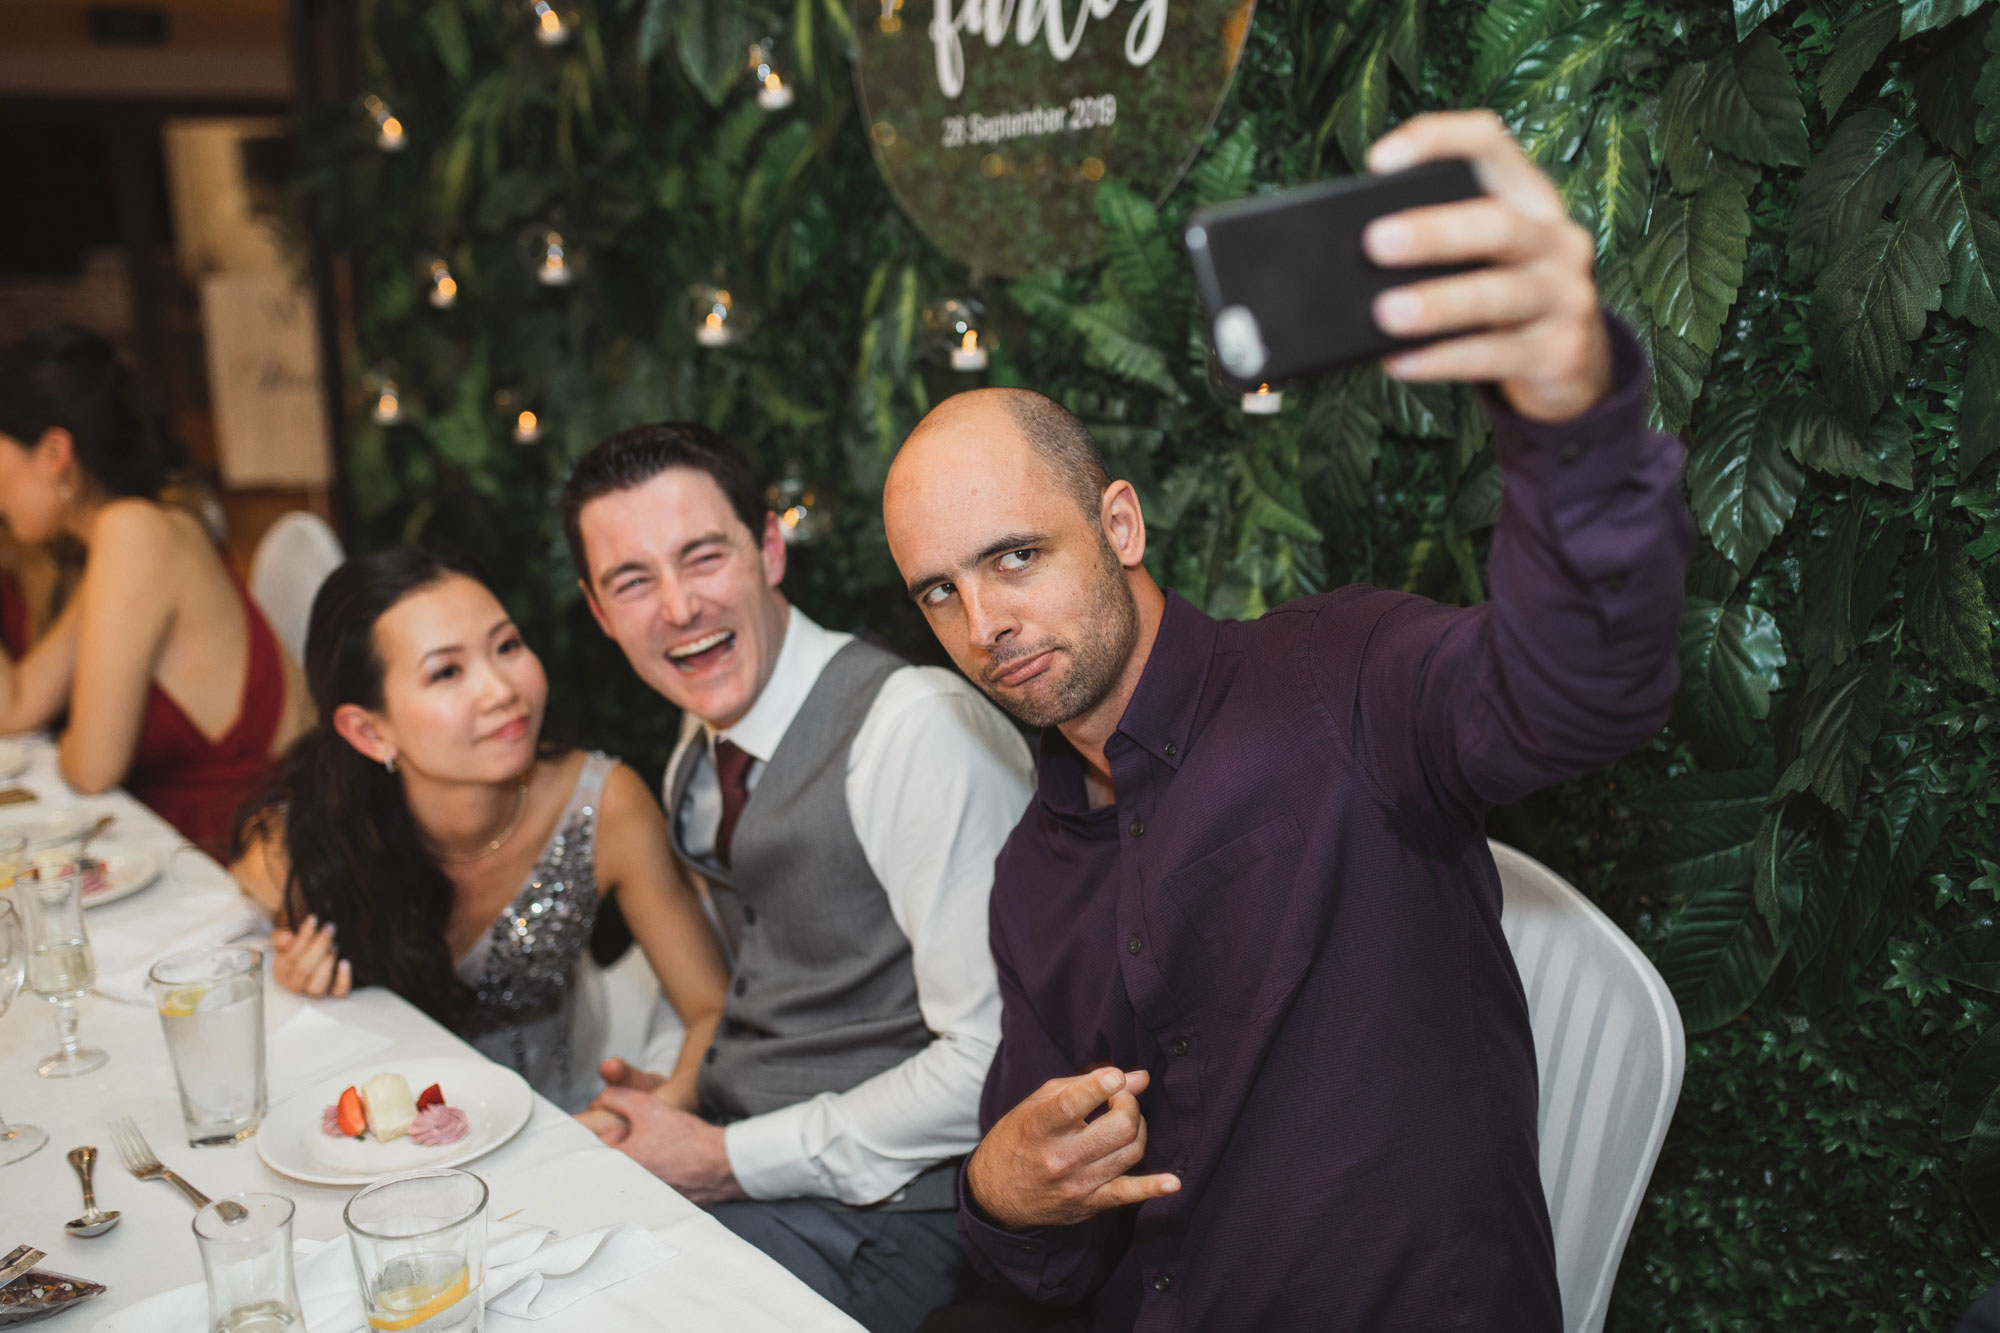 guest taking a selfie with bride and groom